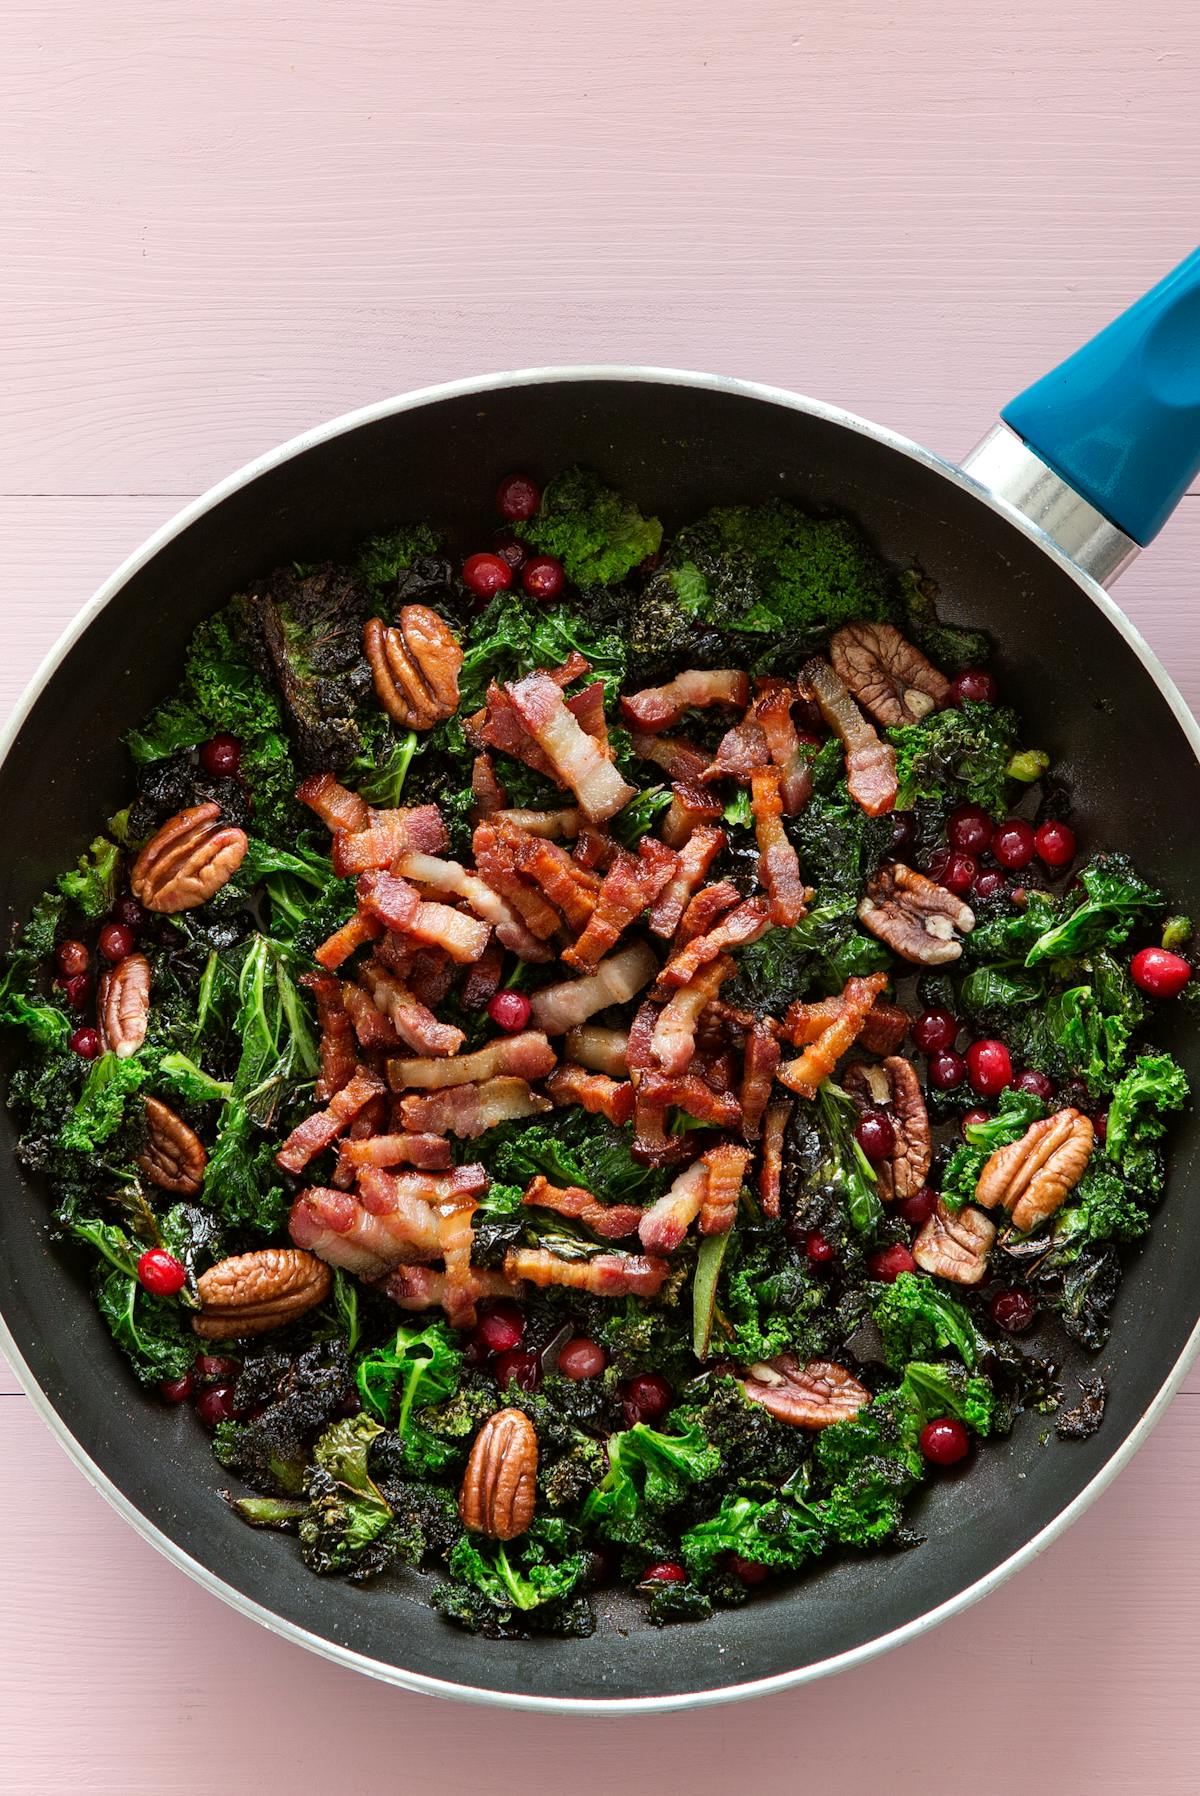 Butter-fried kale with pork and cranberries